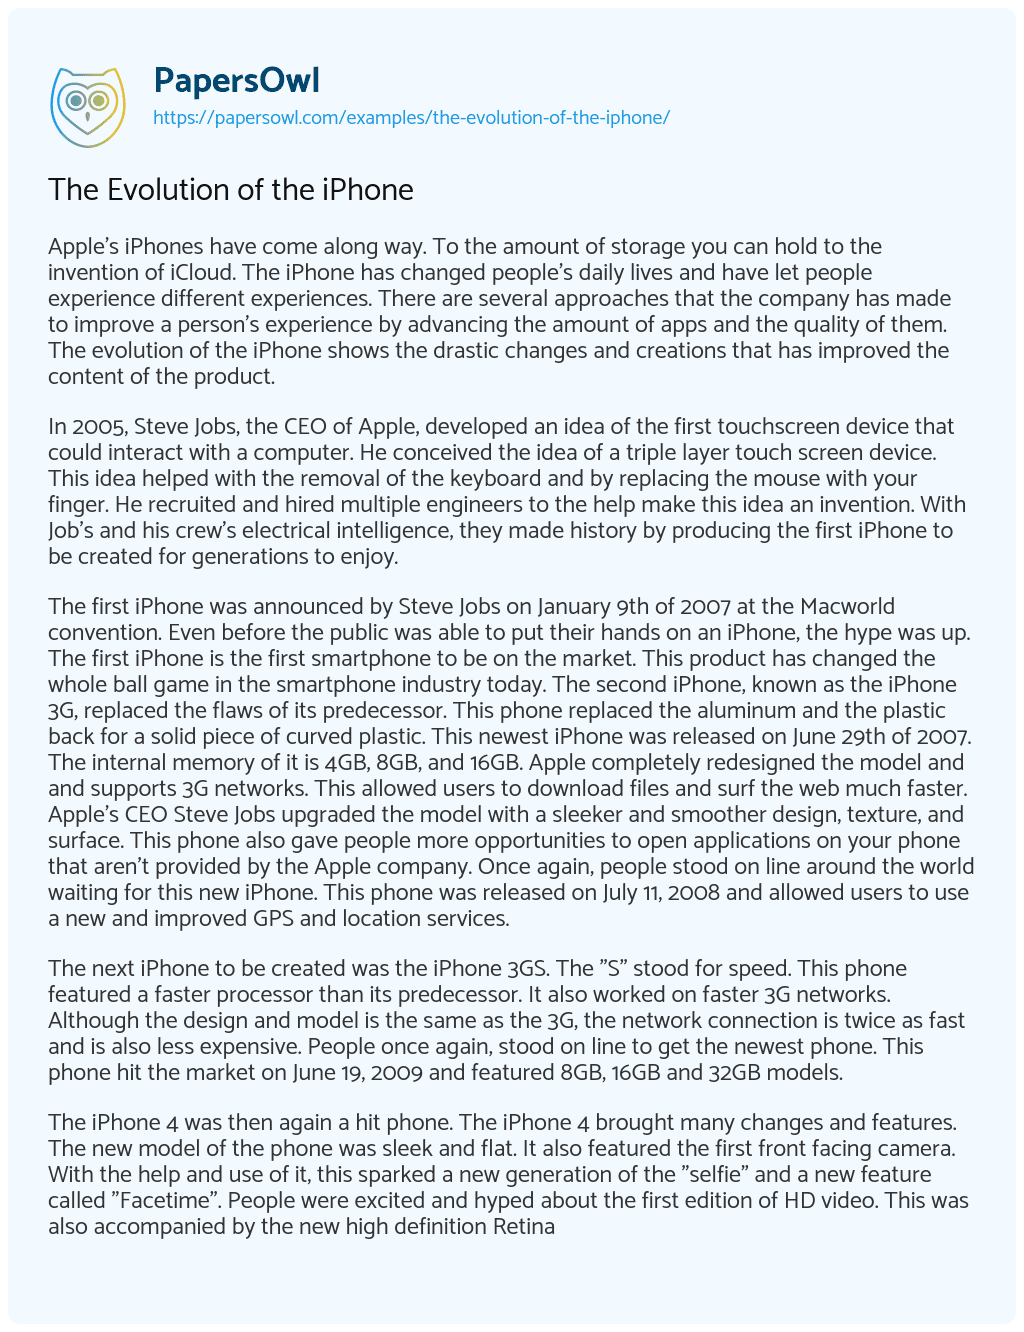 The Evolution of the IPhone essay